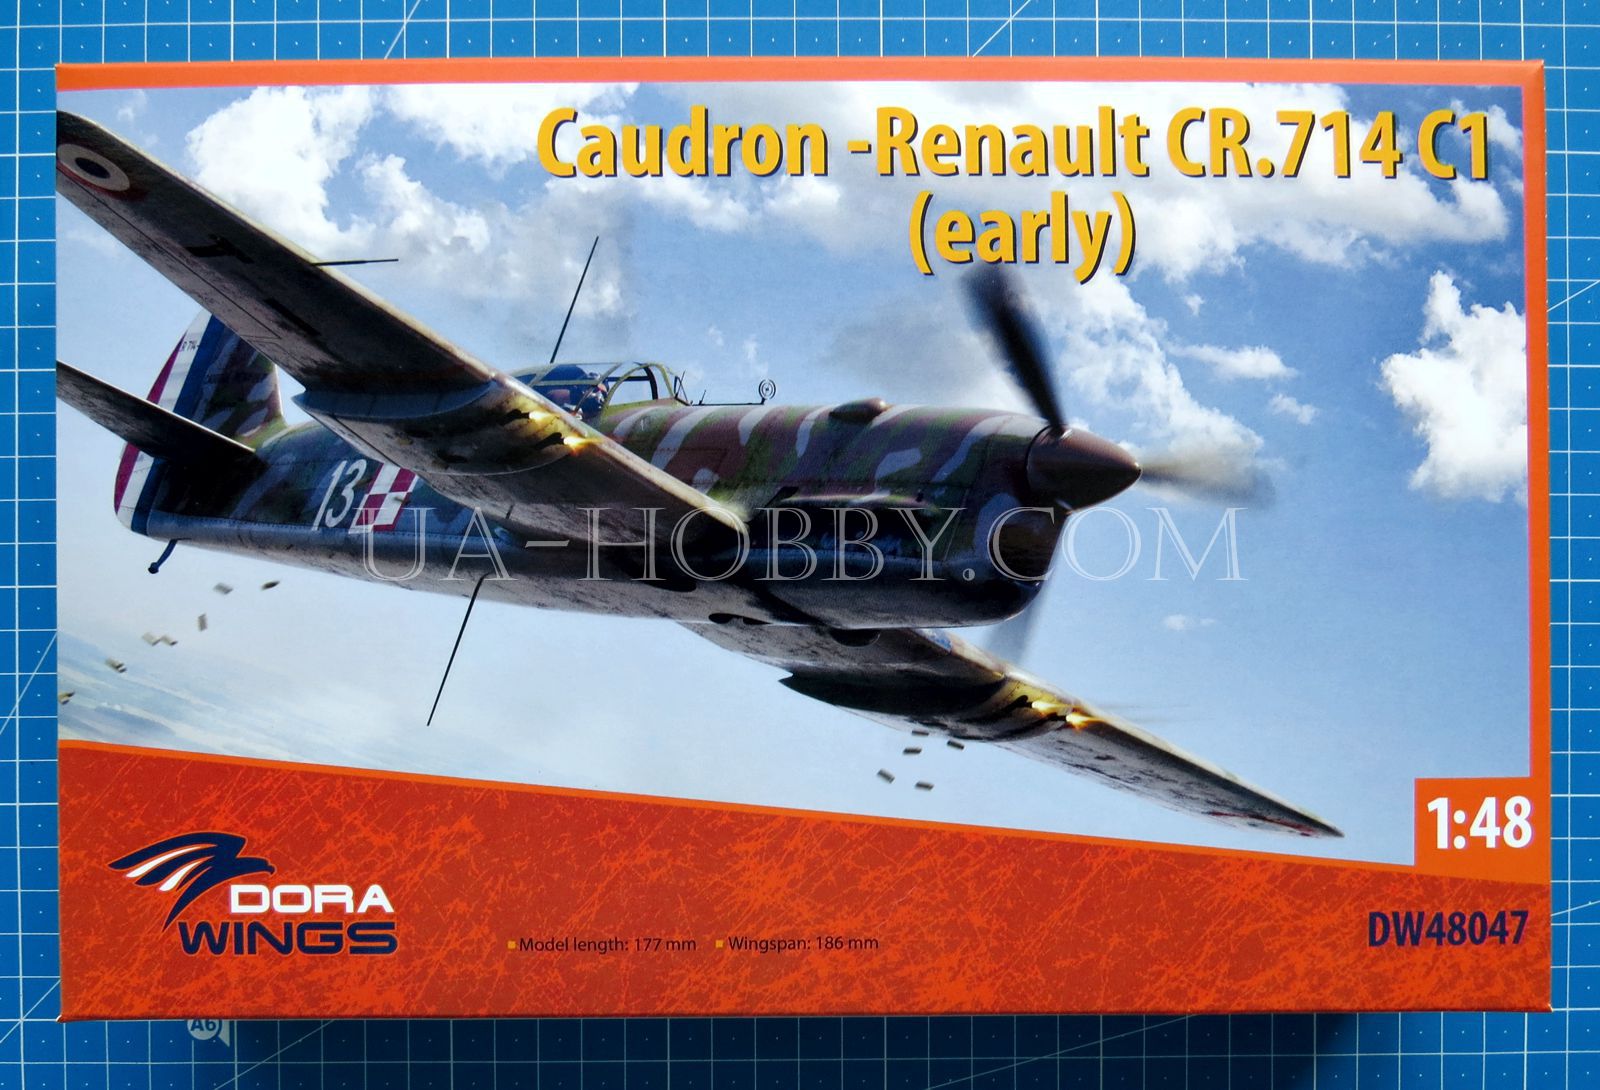 1/48 Caudron-Renault CR.714 C1 (early). Dora Wings DW48047